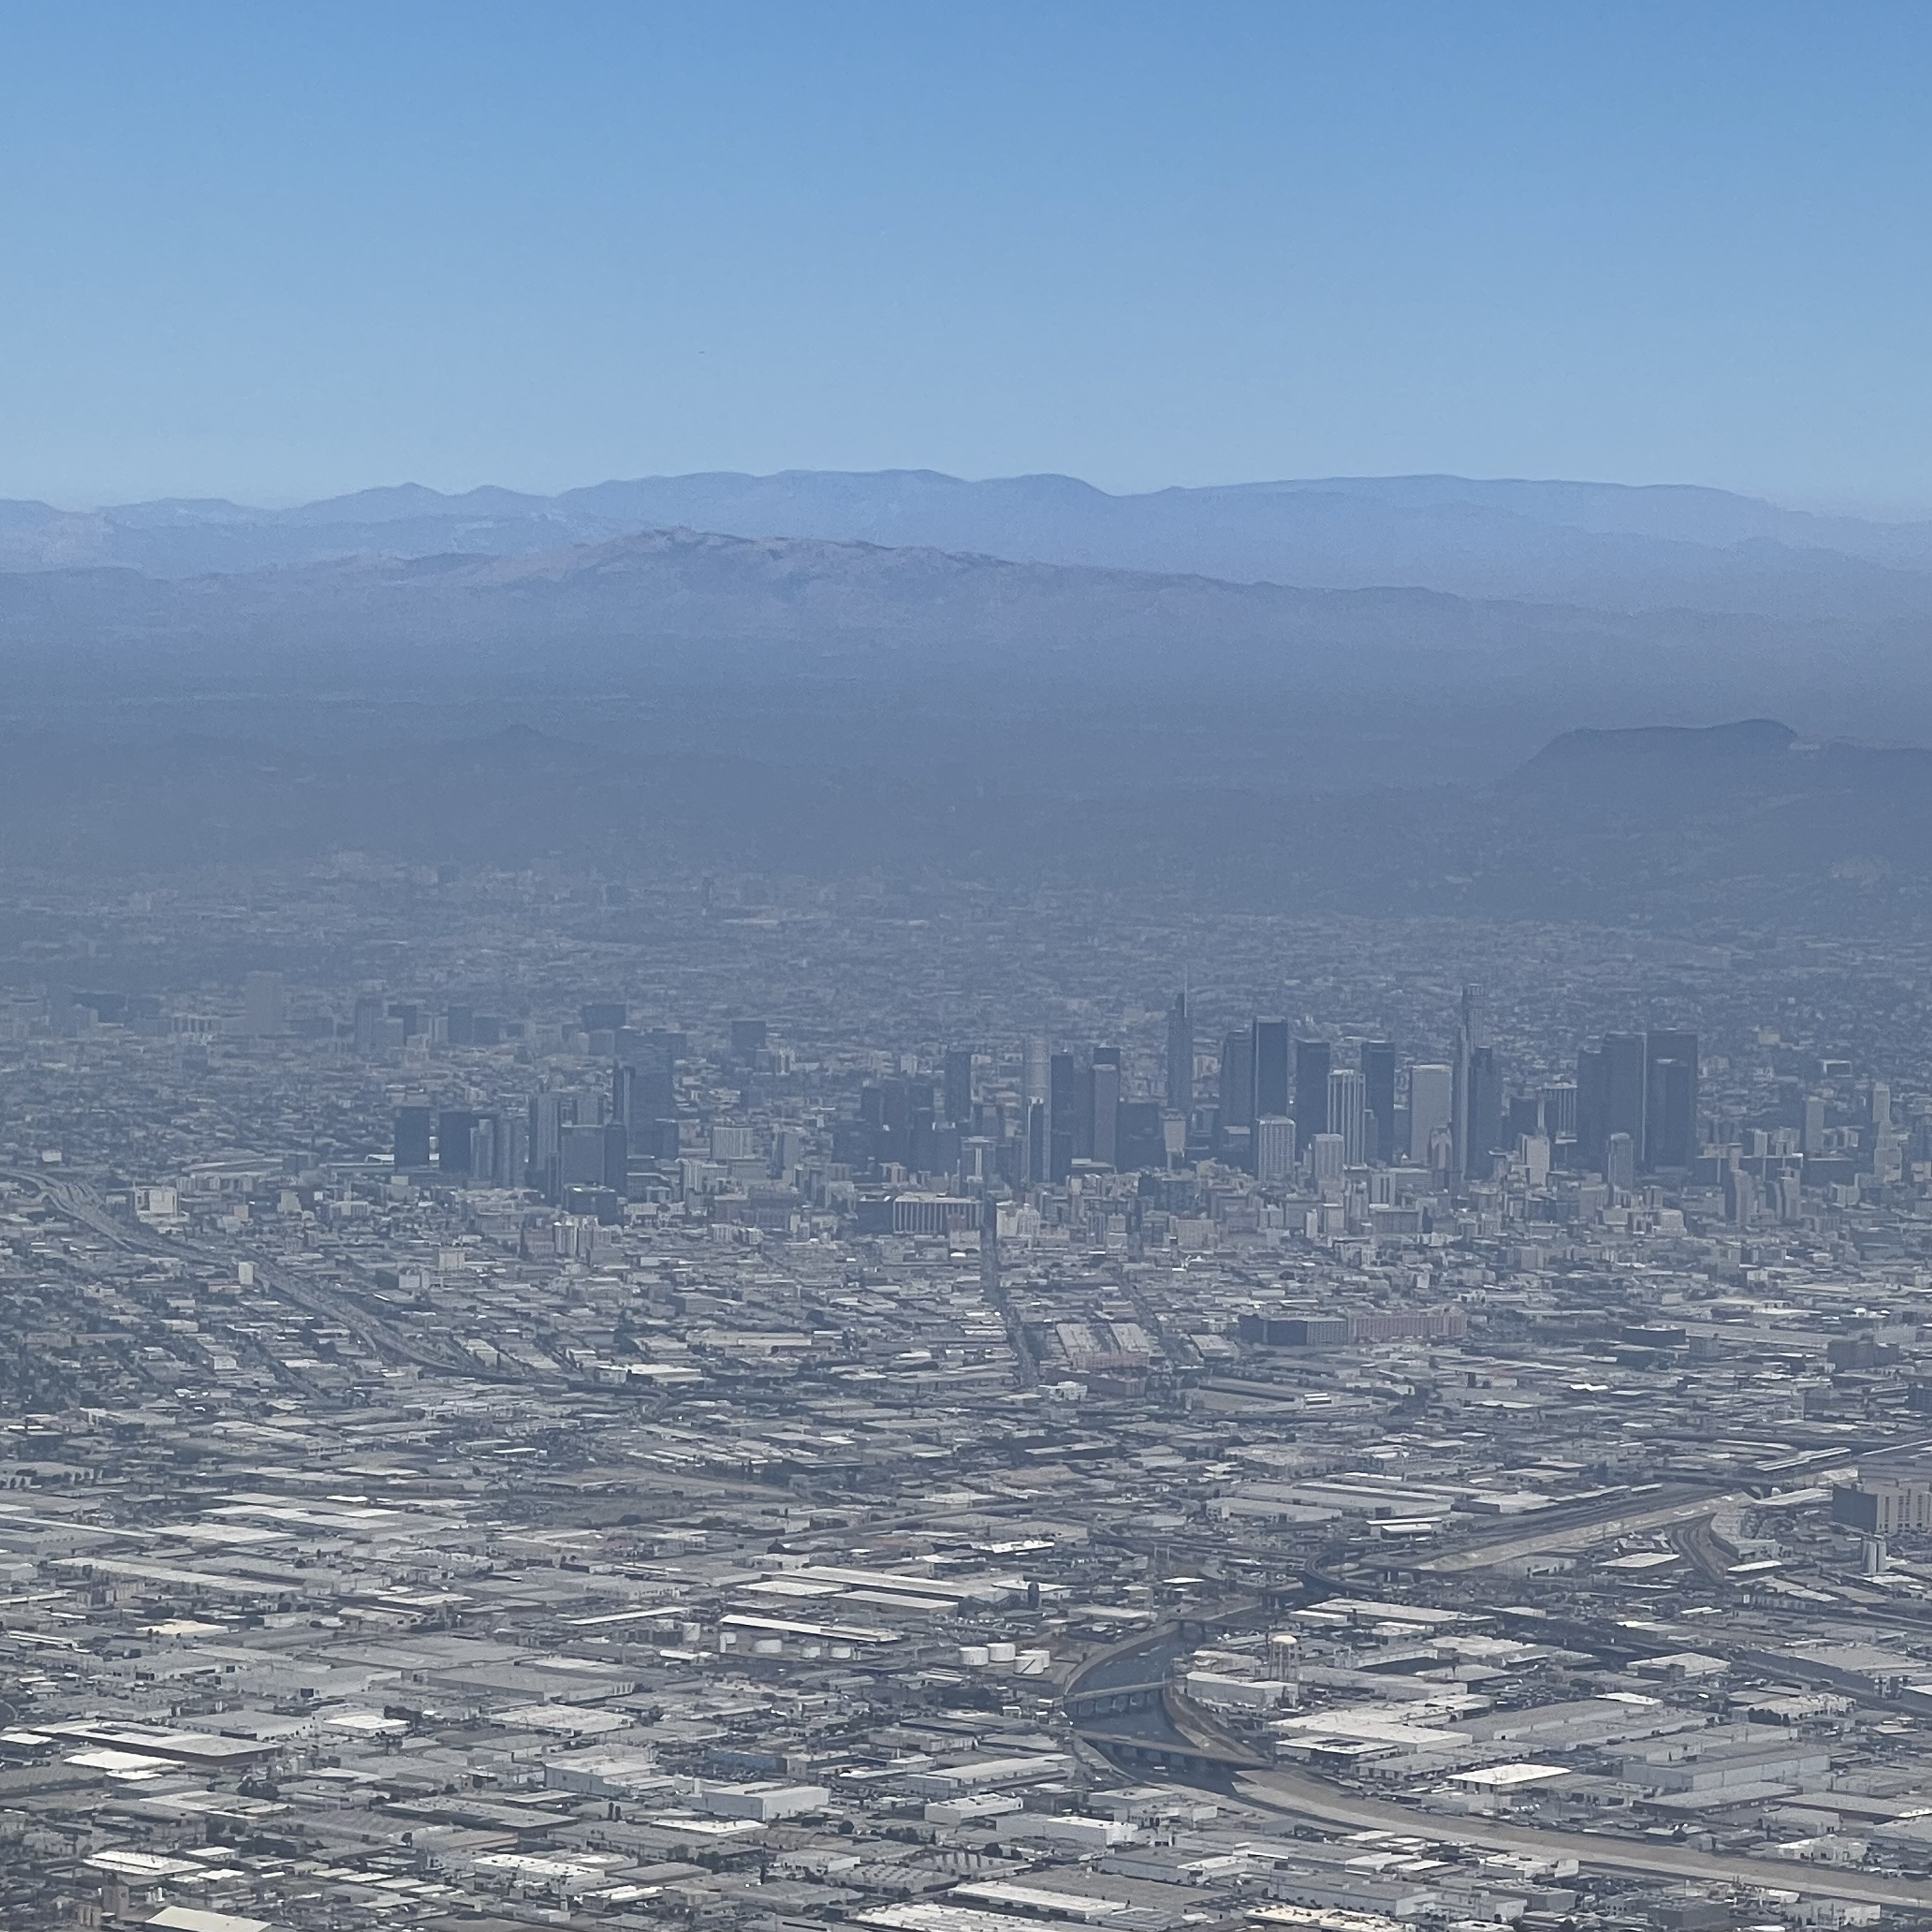 Watching Downtown LA from a plane